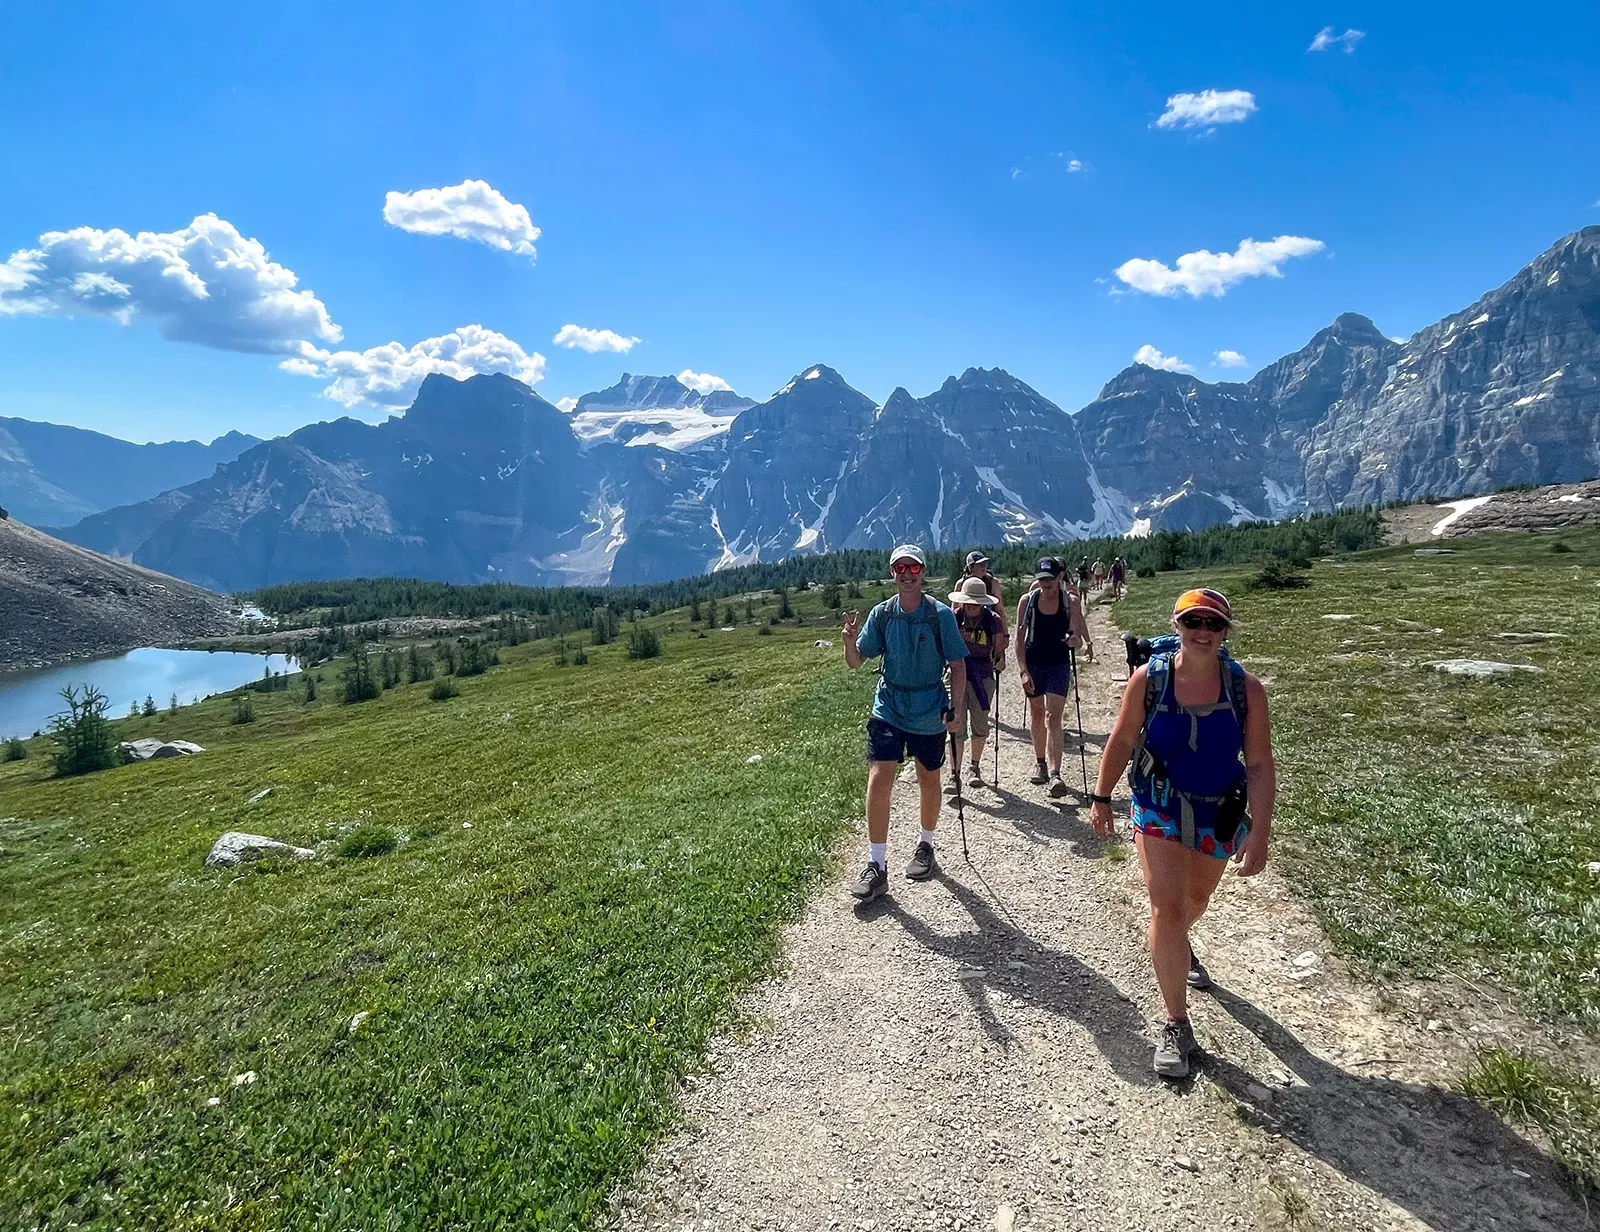 Group of guests walking next to small river, grassy meadow, mountains in background.